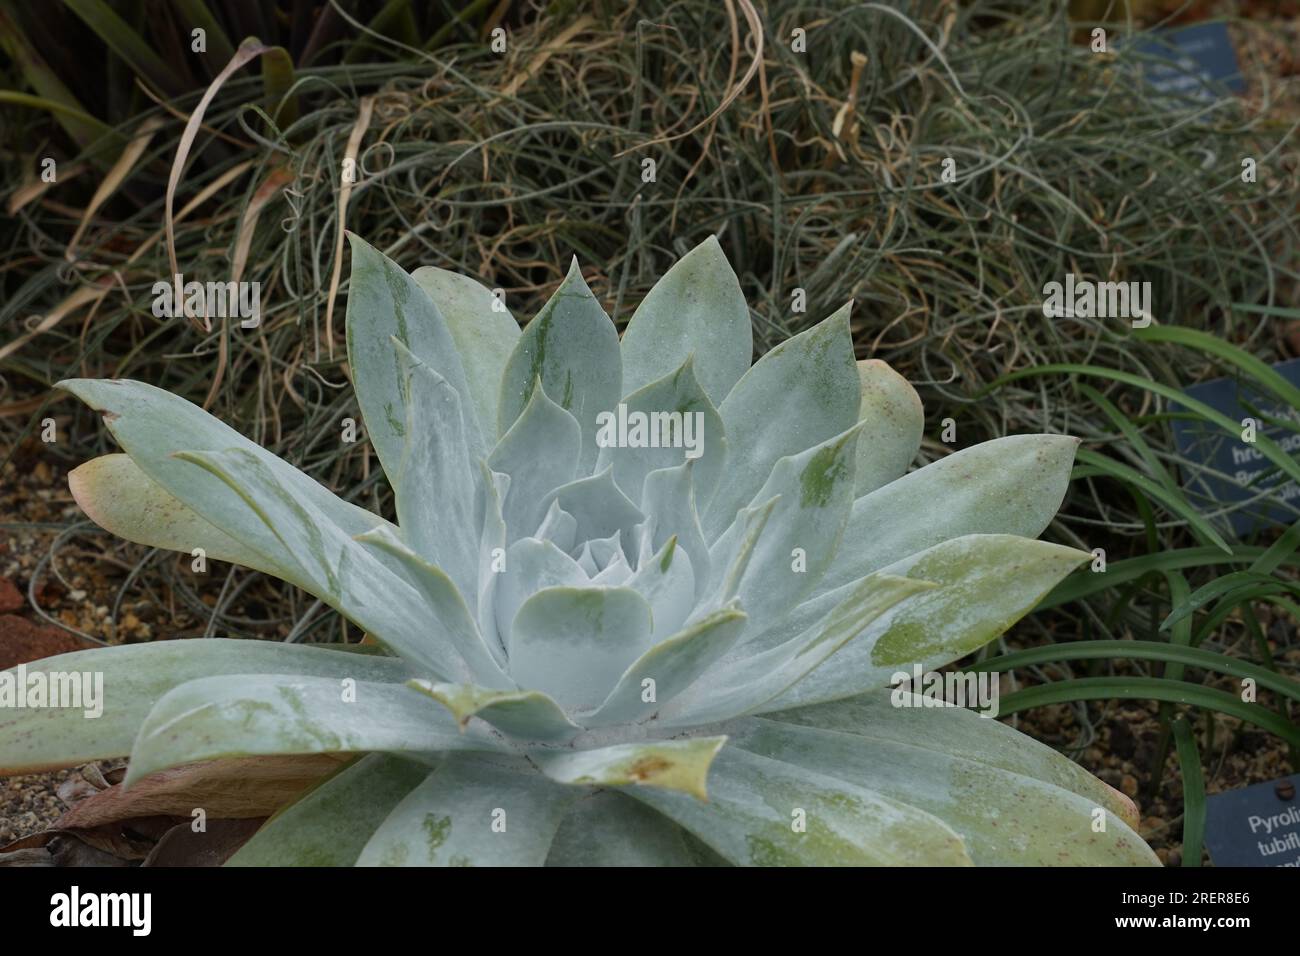 Succulent plant known as San Quintín liveforever, in Latin called Dudleya anthonyi is endemic to a single region in California. Stock Photo